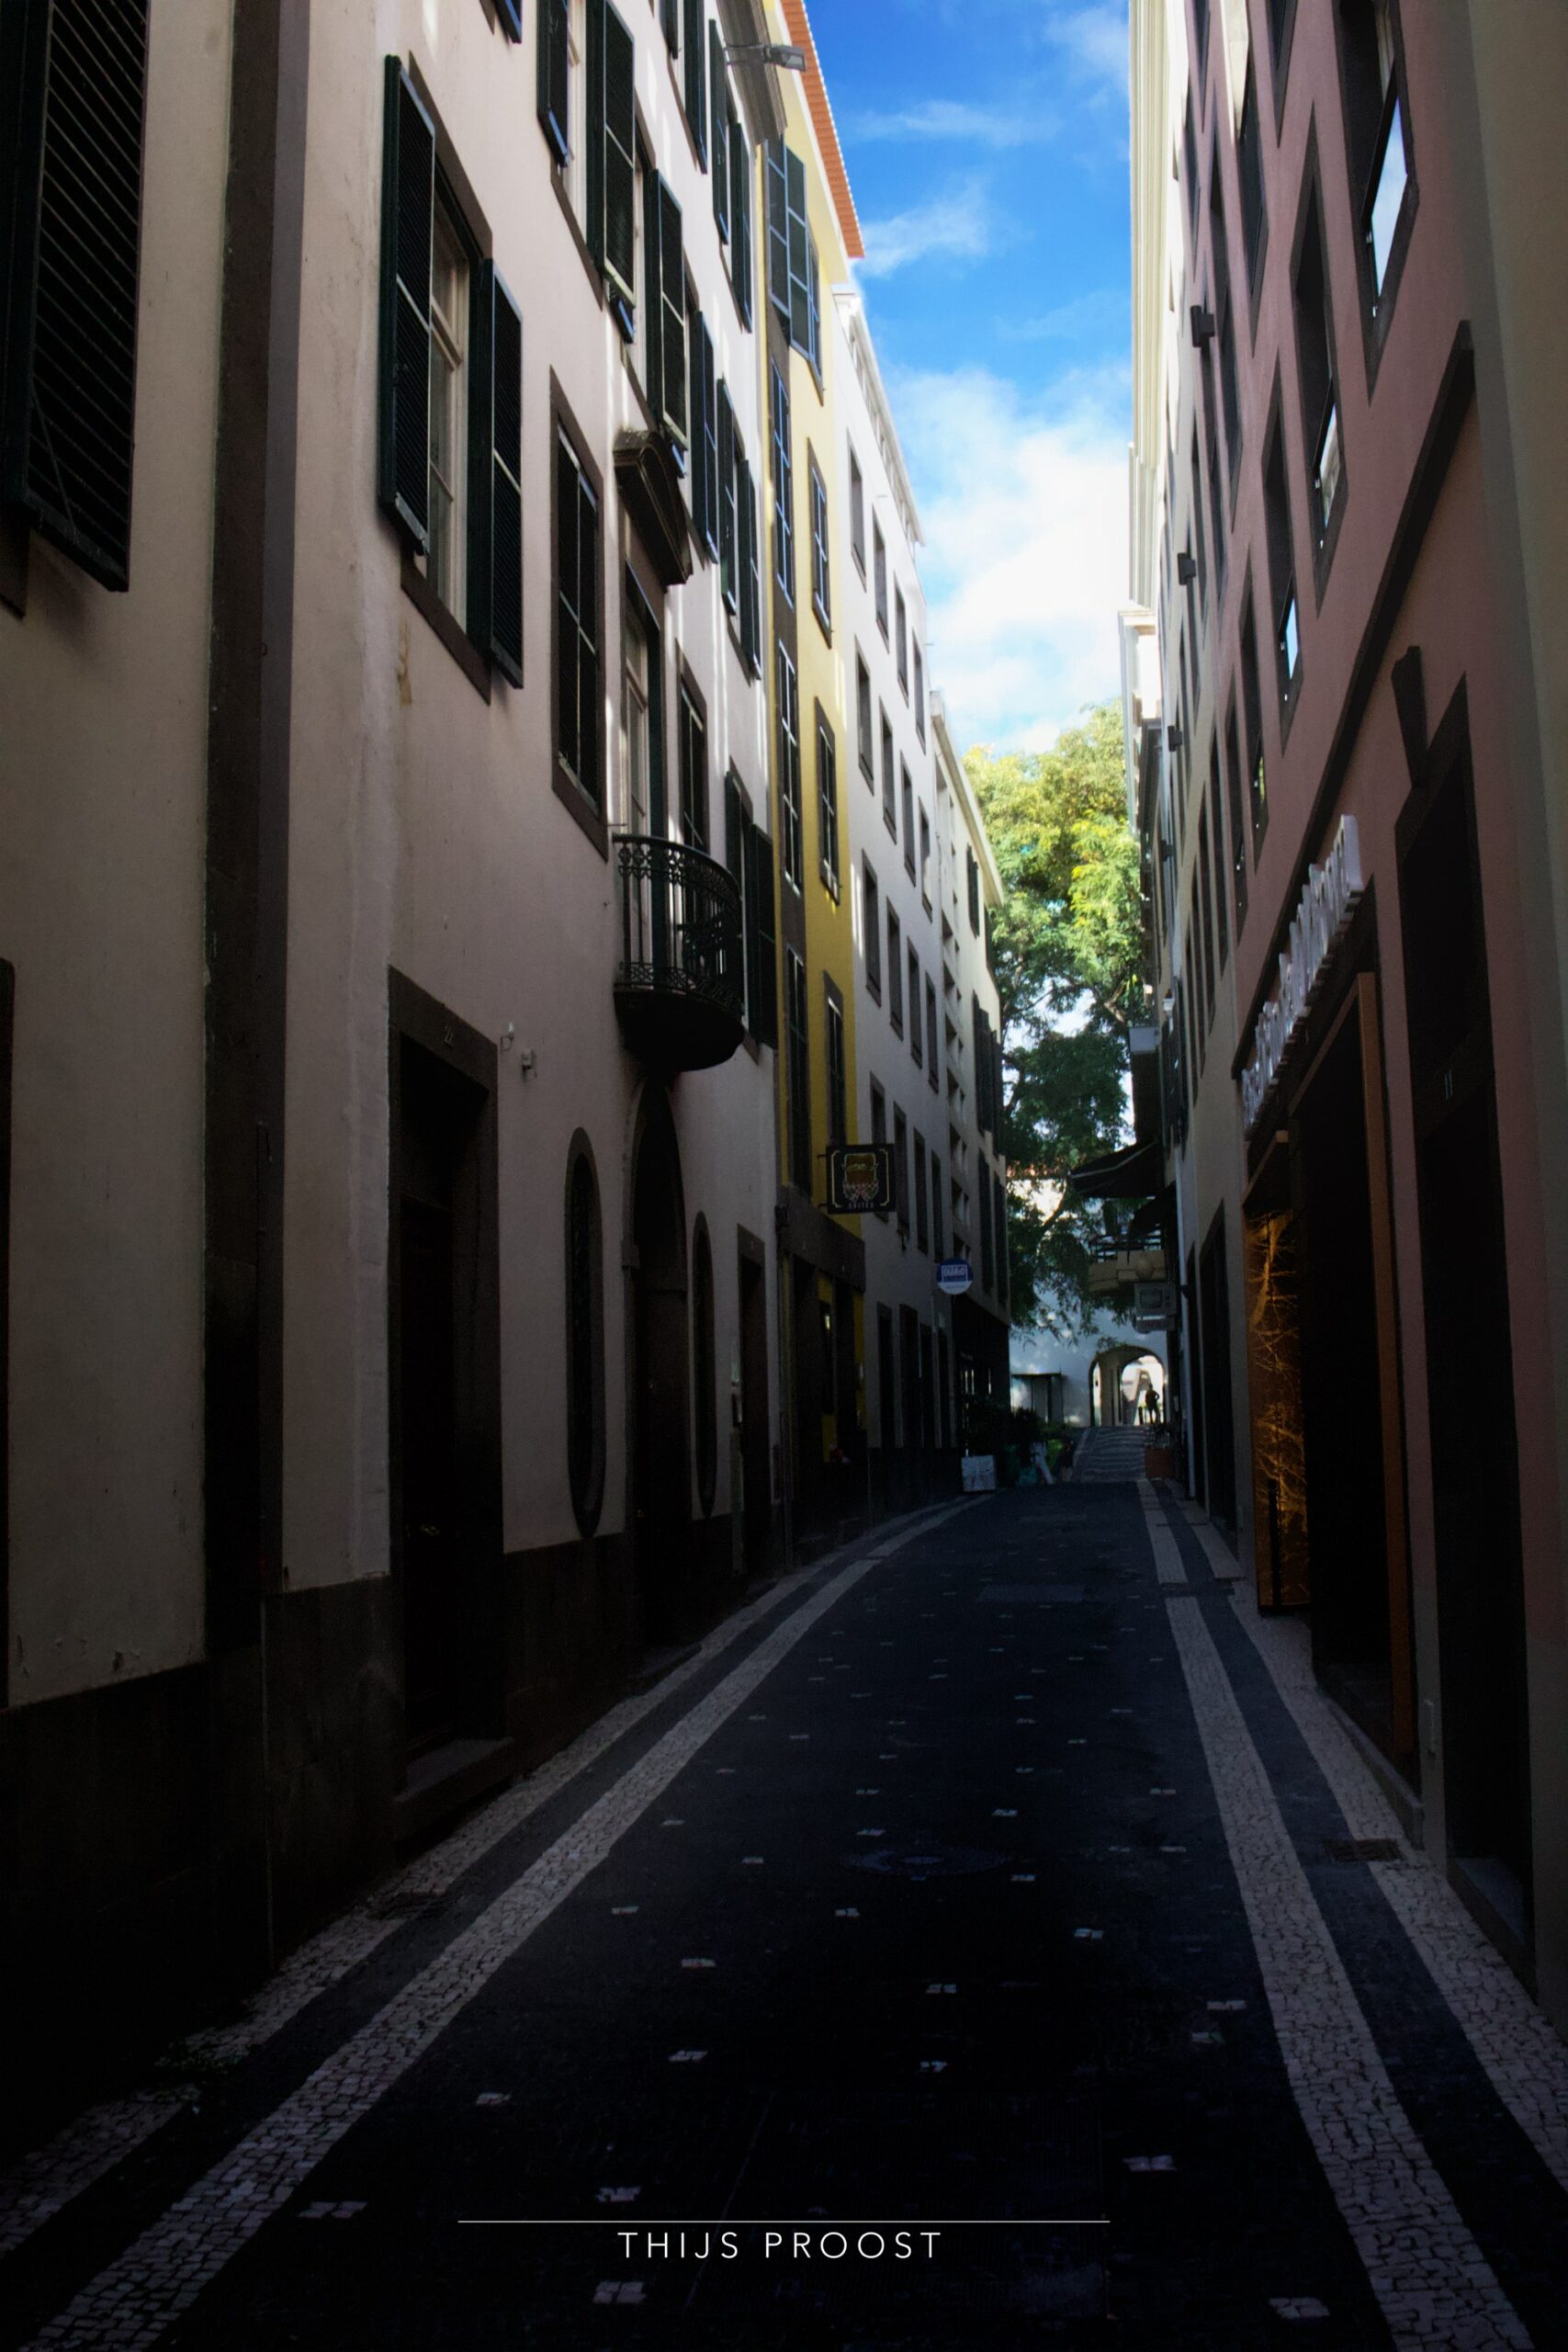 A street in shadow in the center of Funchal Madeira. The sky in the center brakes the two halfs of the image.